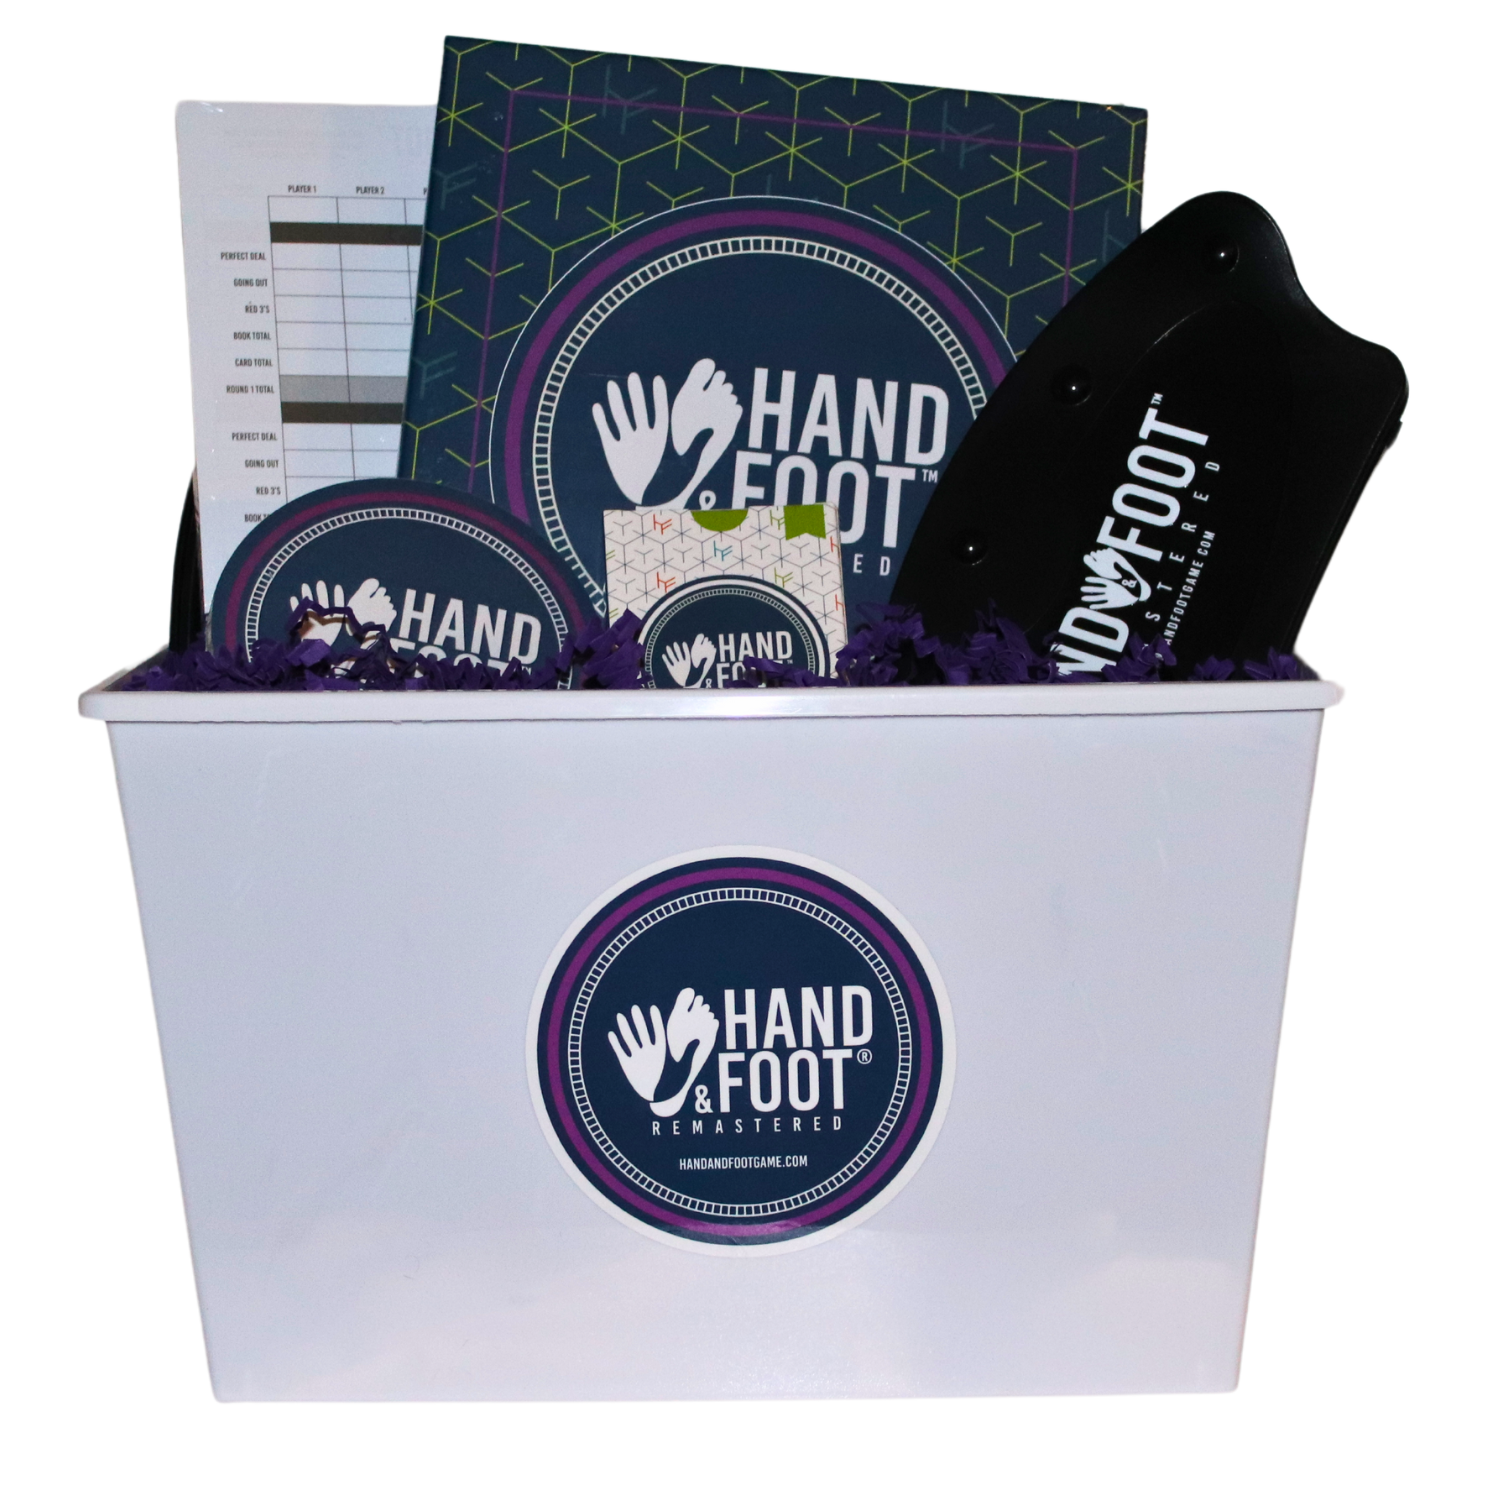 Hand & Foot Remastered 8 Player Gift Set